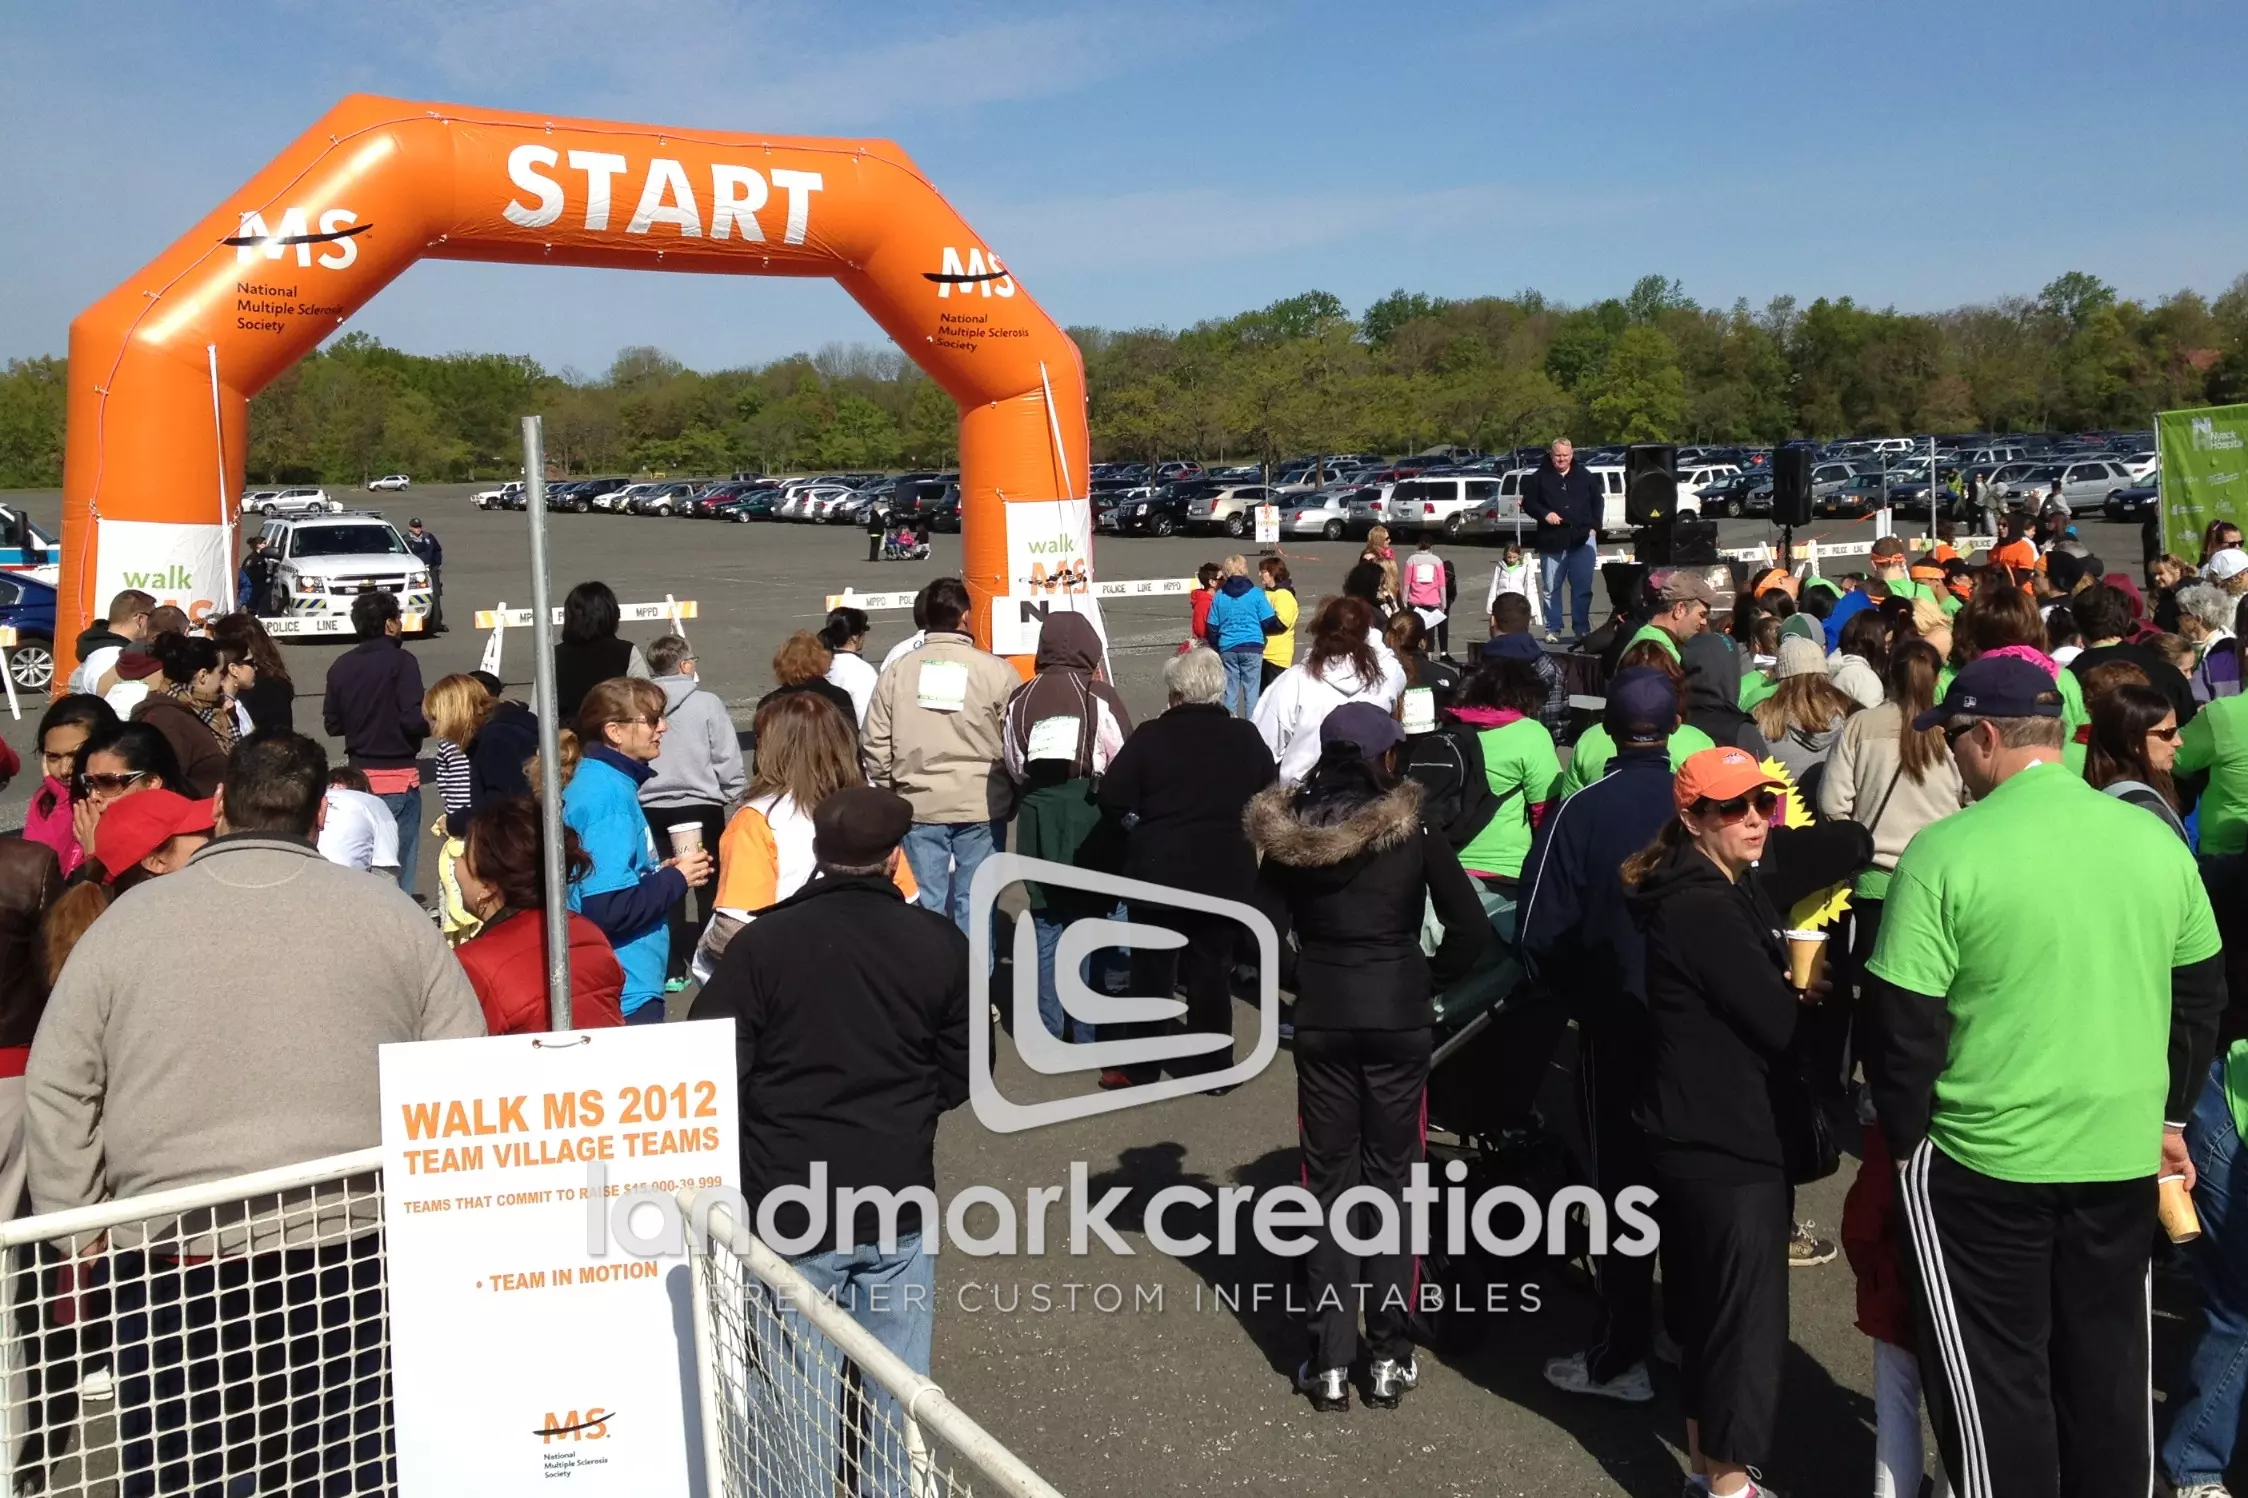 National MS Society of New York's Inflatable Arch at Walk MS Fundraising Event